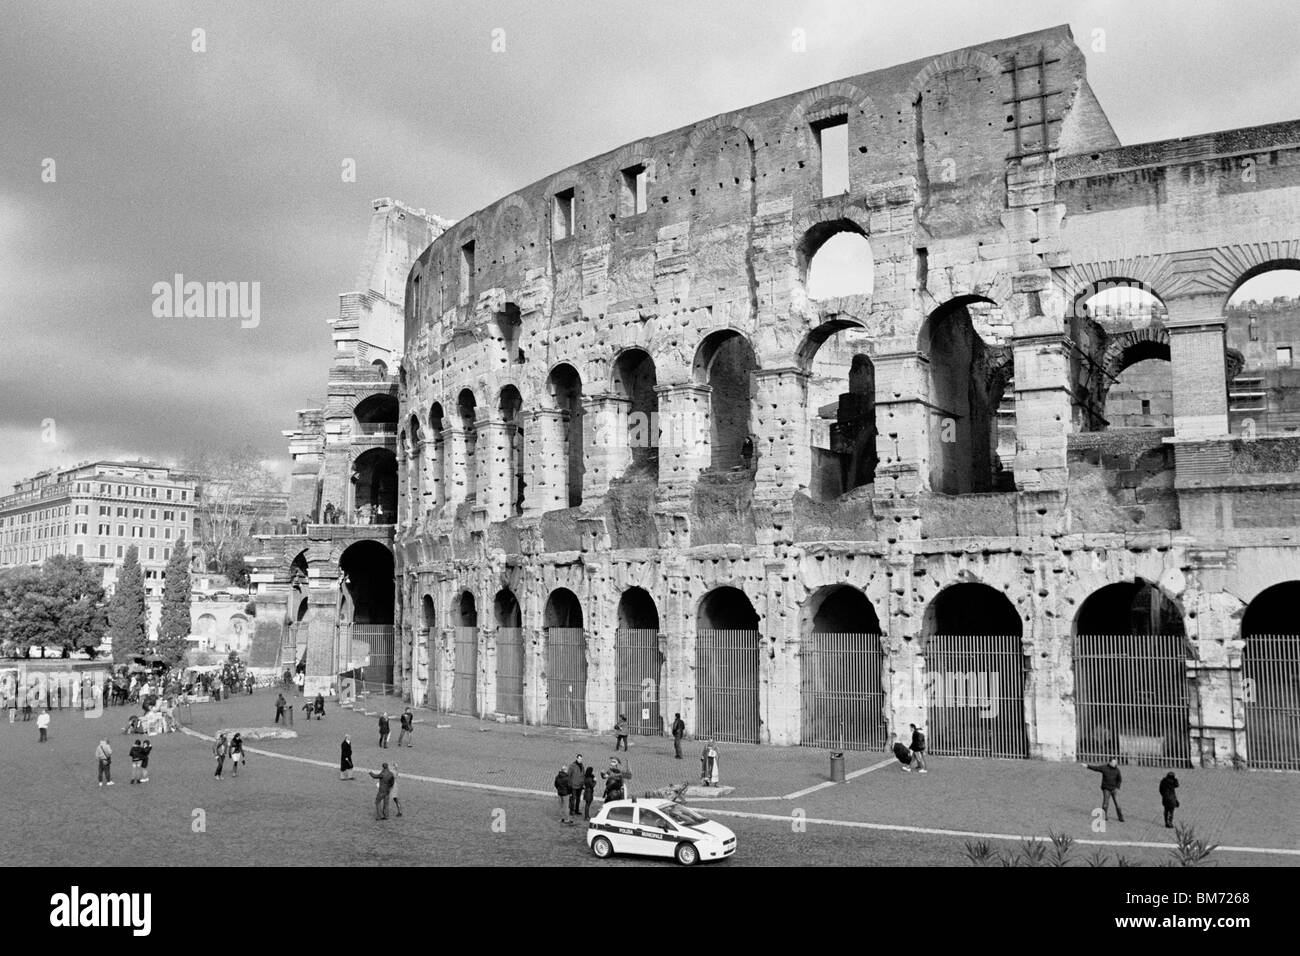 Rome, Italy, 30 January 2010 -- The Colosseum, captured in classic black and white on Agfa APX 100 negative film. Stock Photo